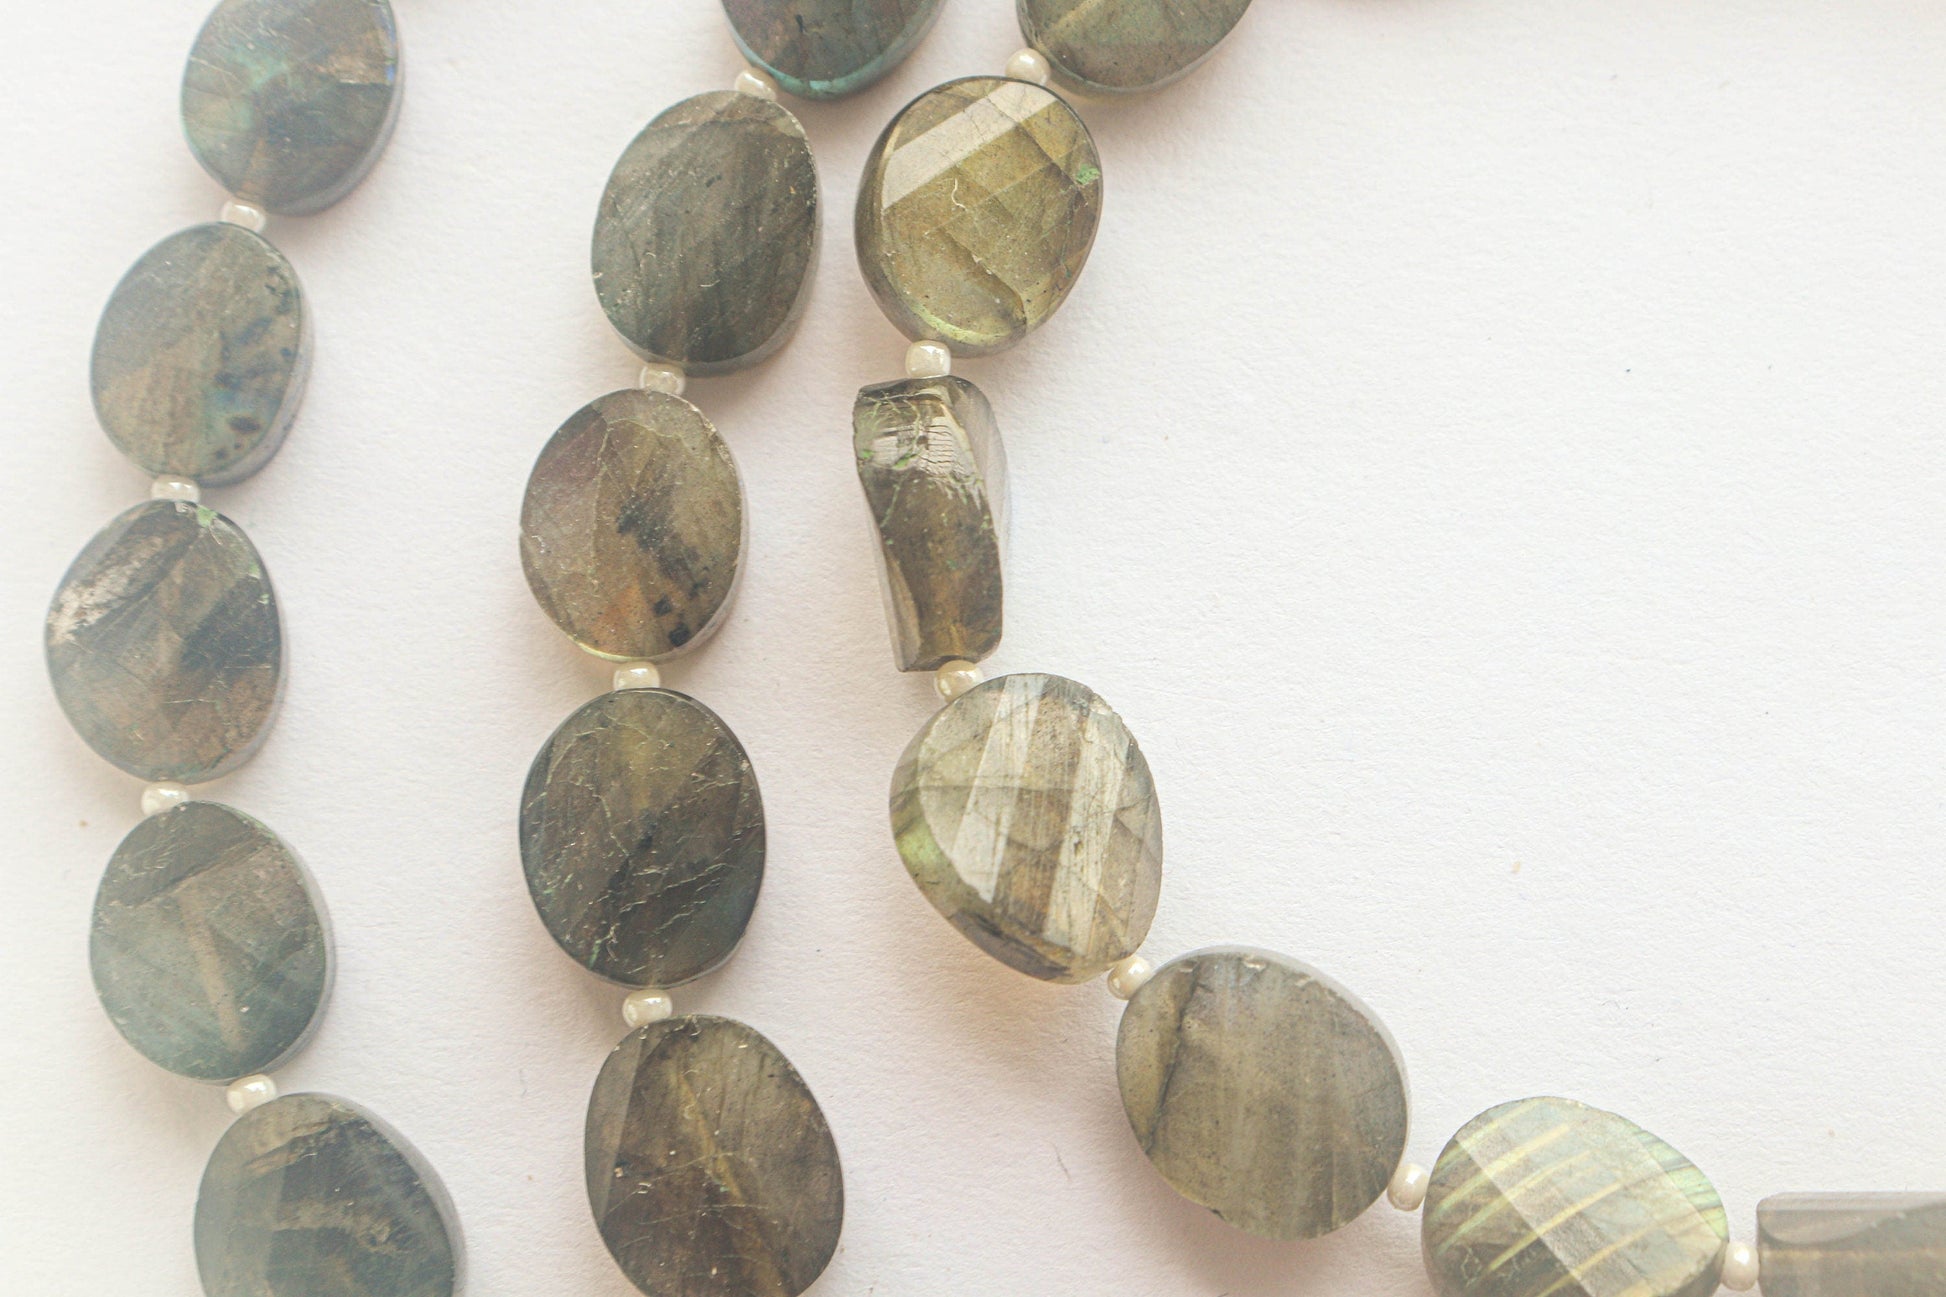 Labradorite Twisted Oval Shape Faceted Beads | 7 Inch String | Natural Labradorite | 14 Pieces String | Beadsforyourjewelry Beadsforyourjewelry